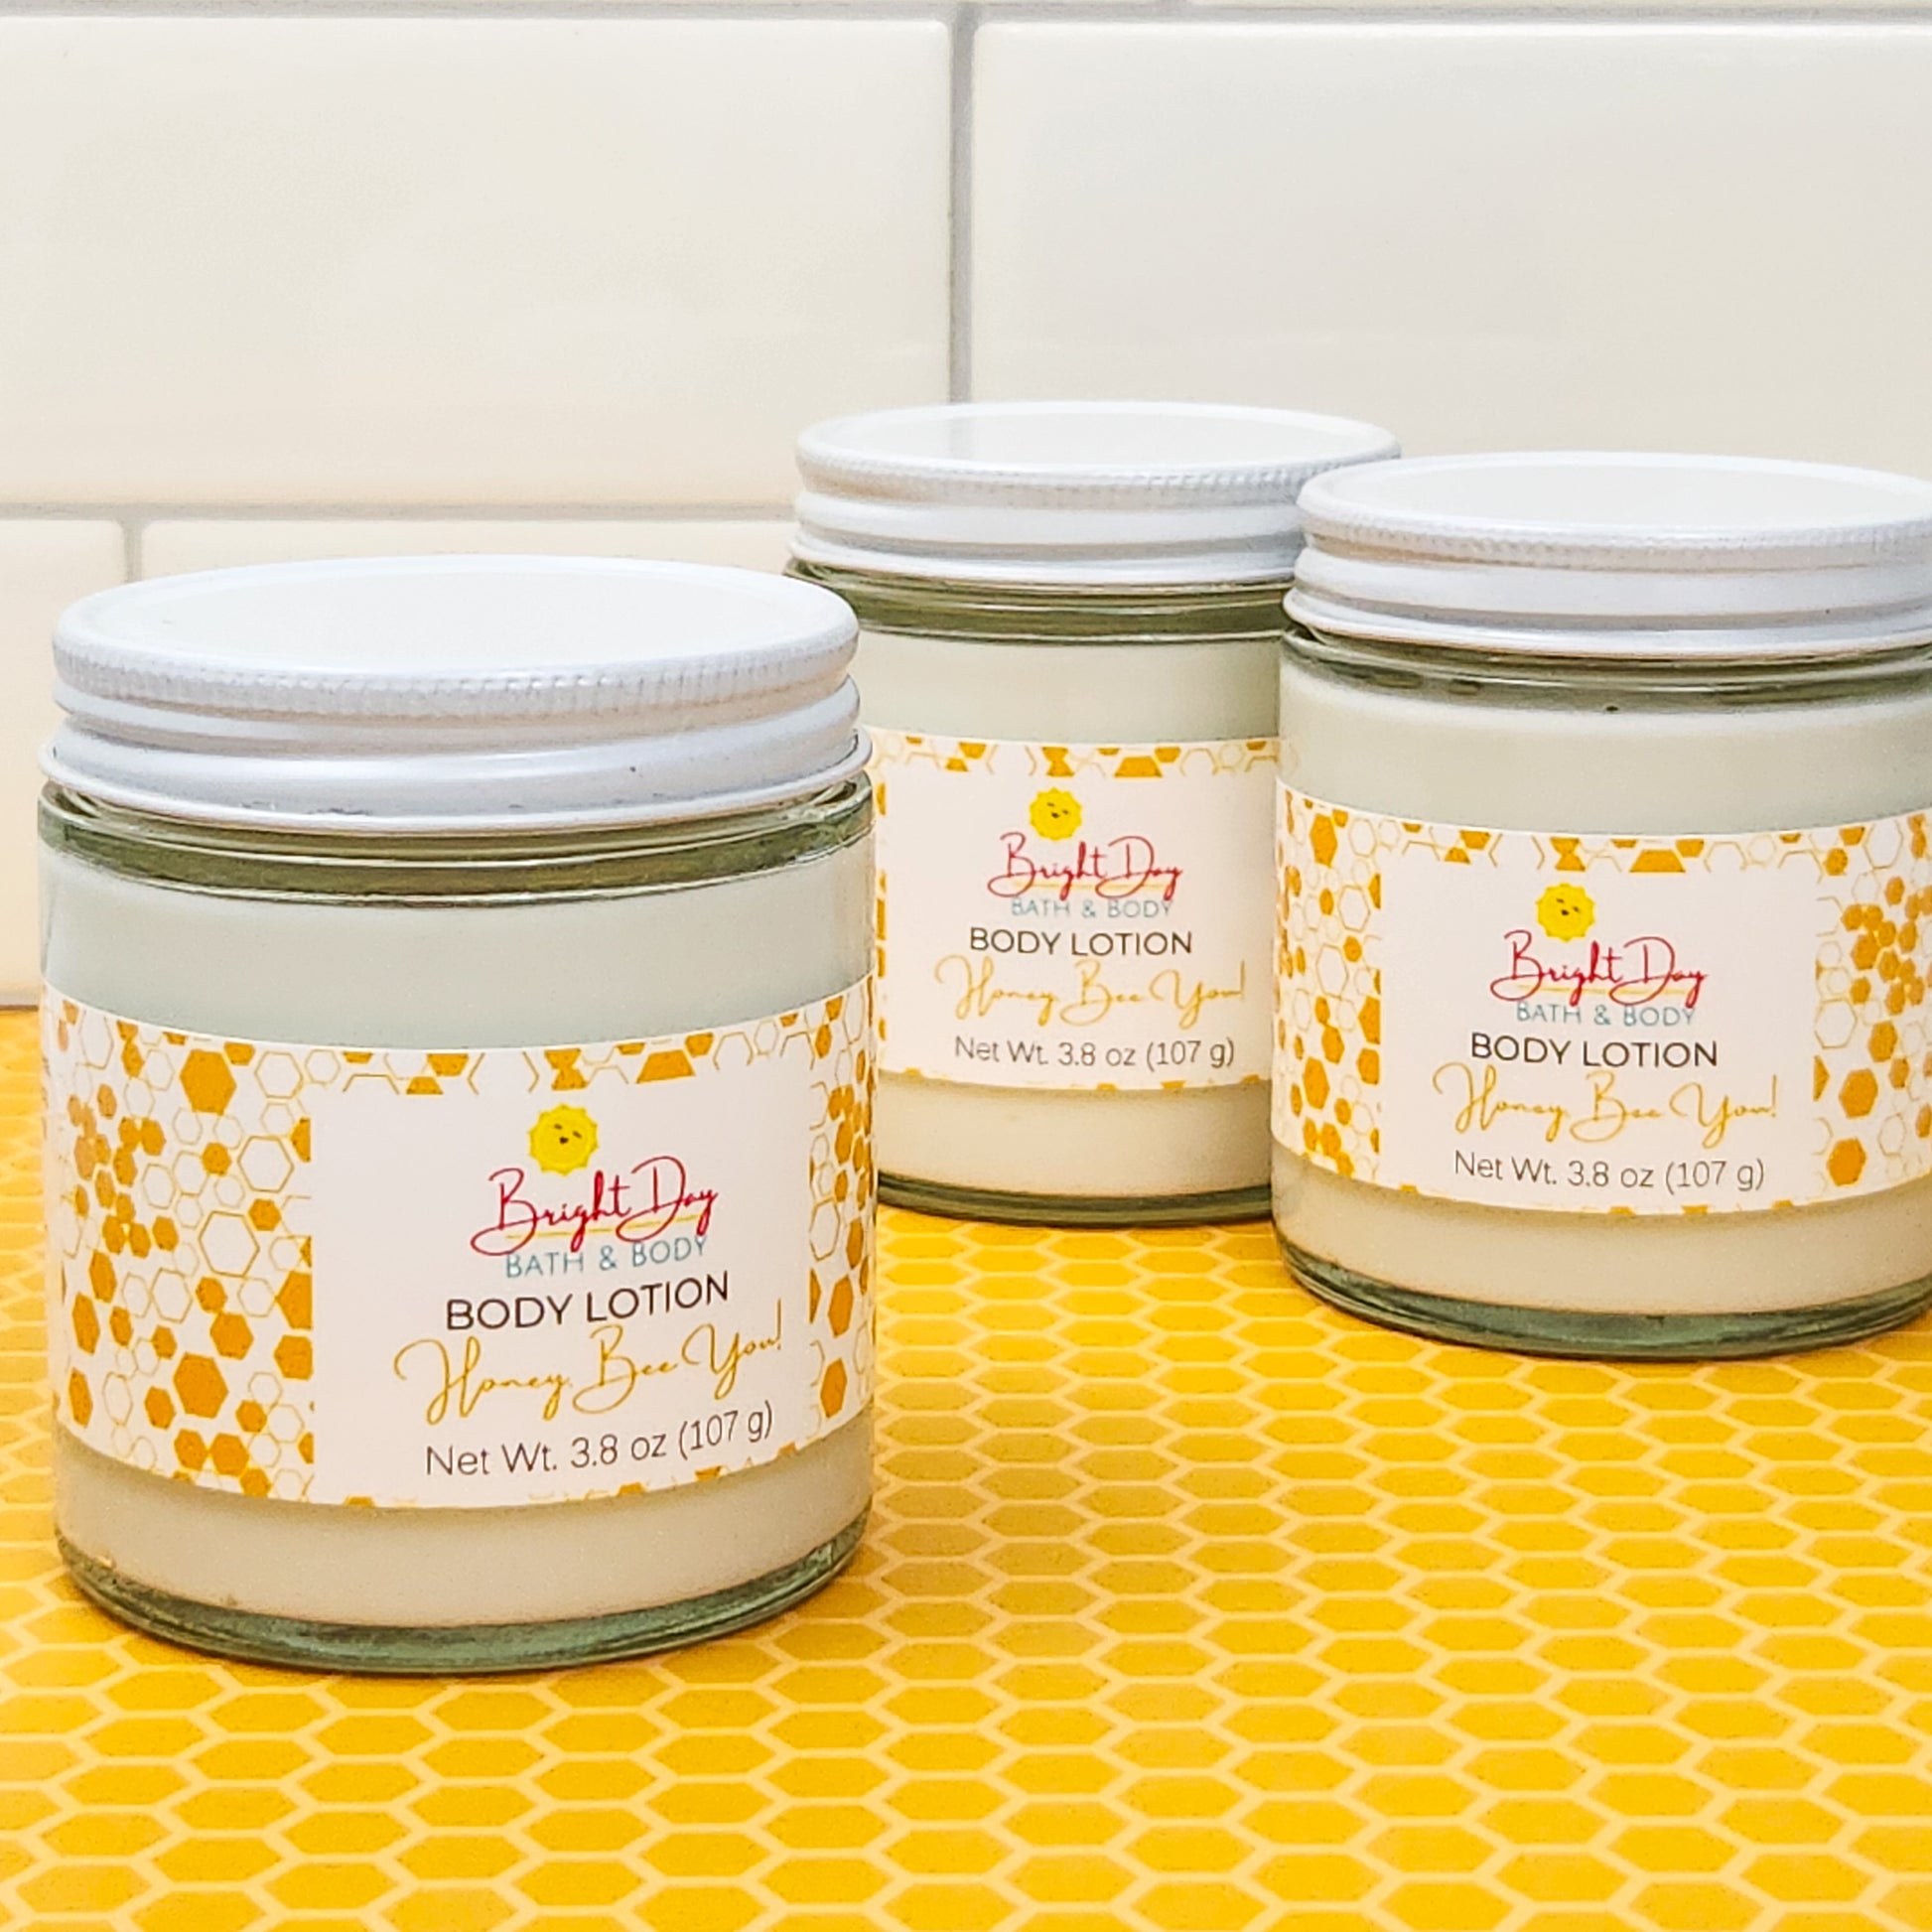 3 jars of Honey, Bee You Body Lotion, on a tan honeycomb background.